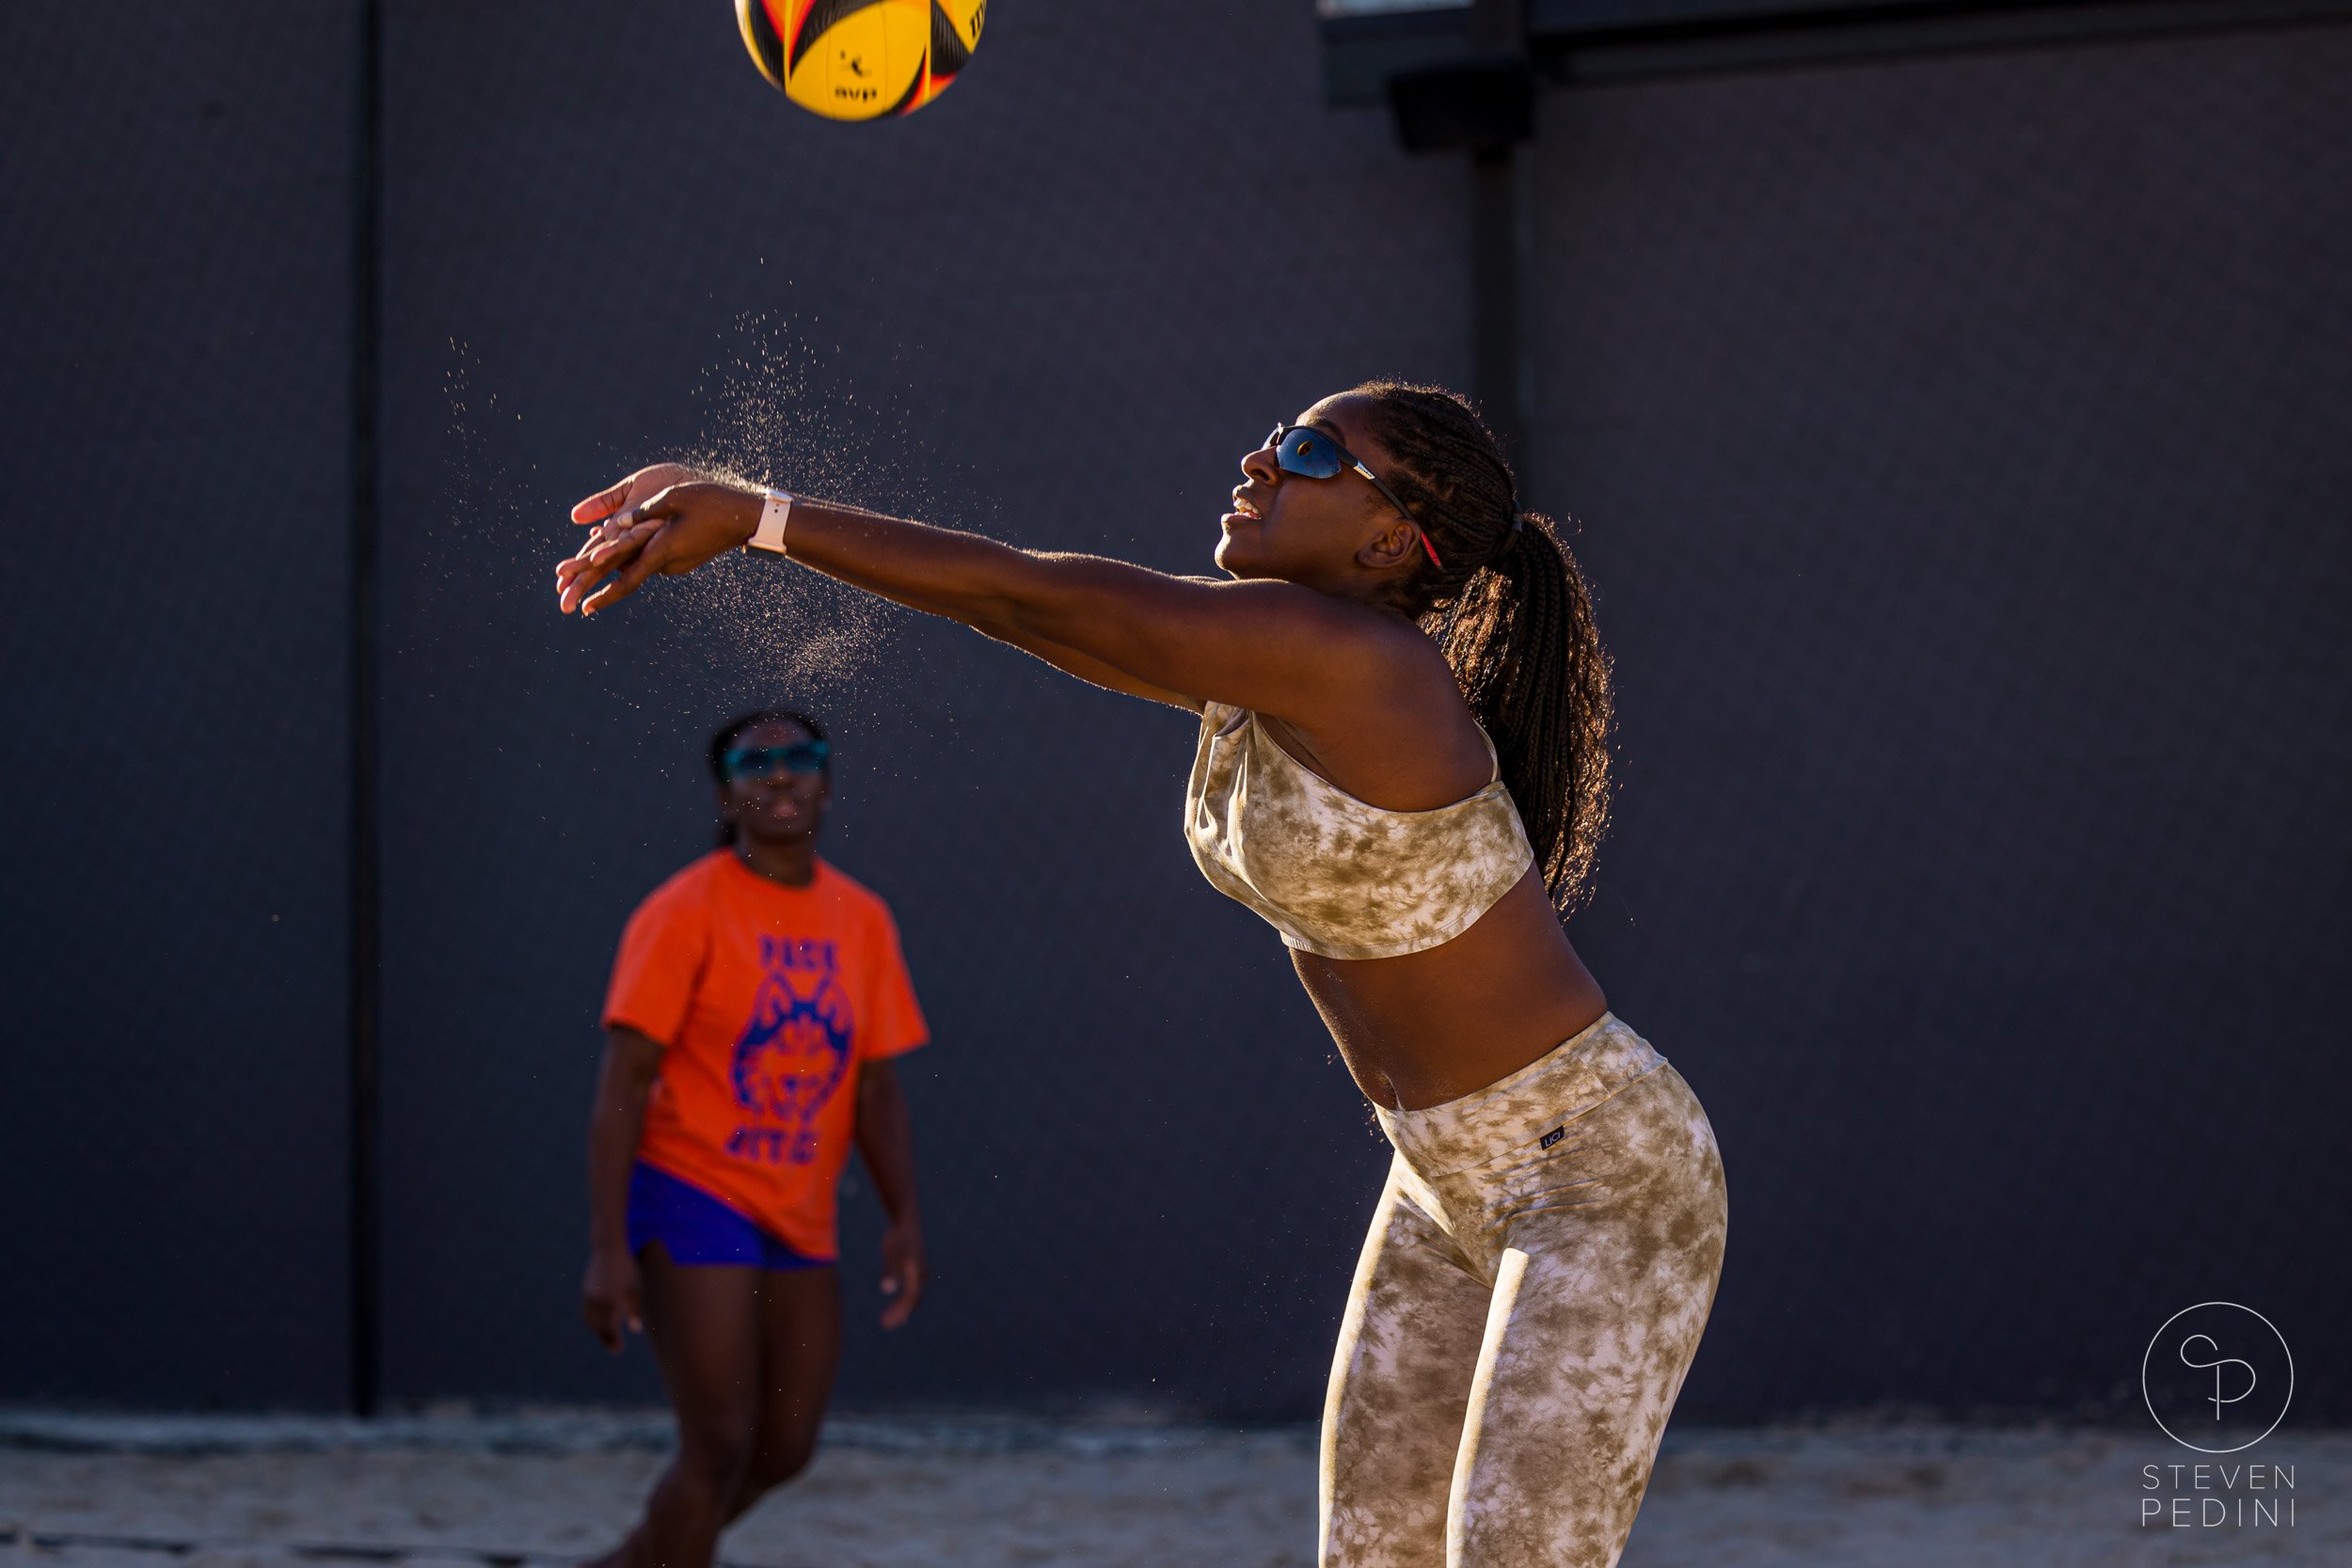 Steven Pedini Photography - Bumpy Pickle - Sand Volleyball - Houston TX - World Cup of Volleyball - 00075.jpg